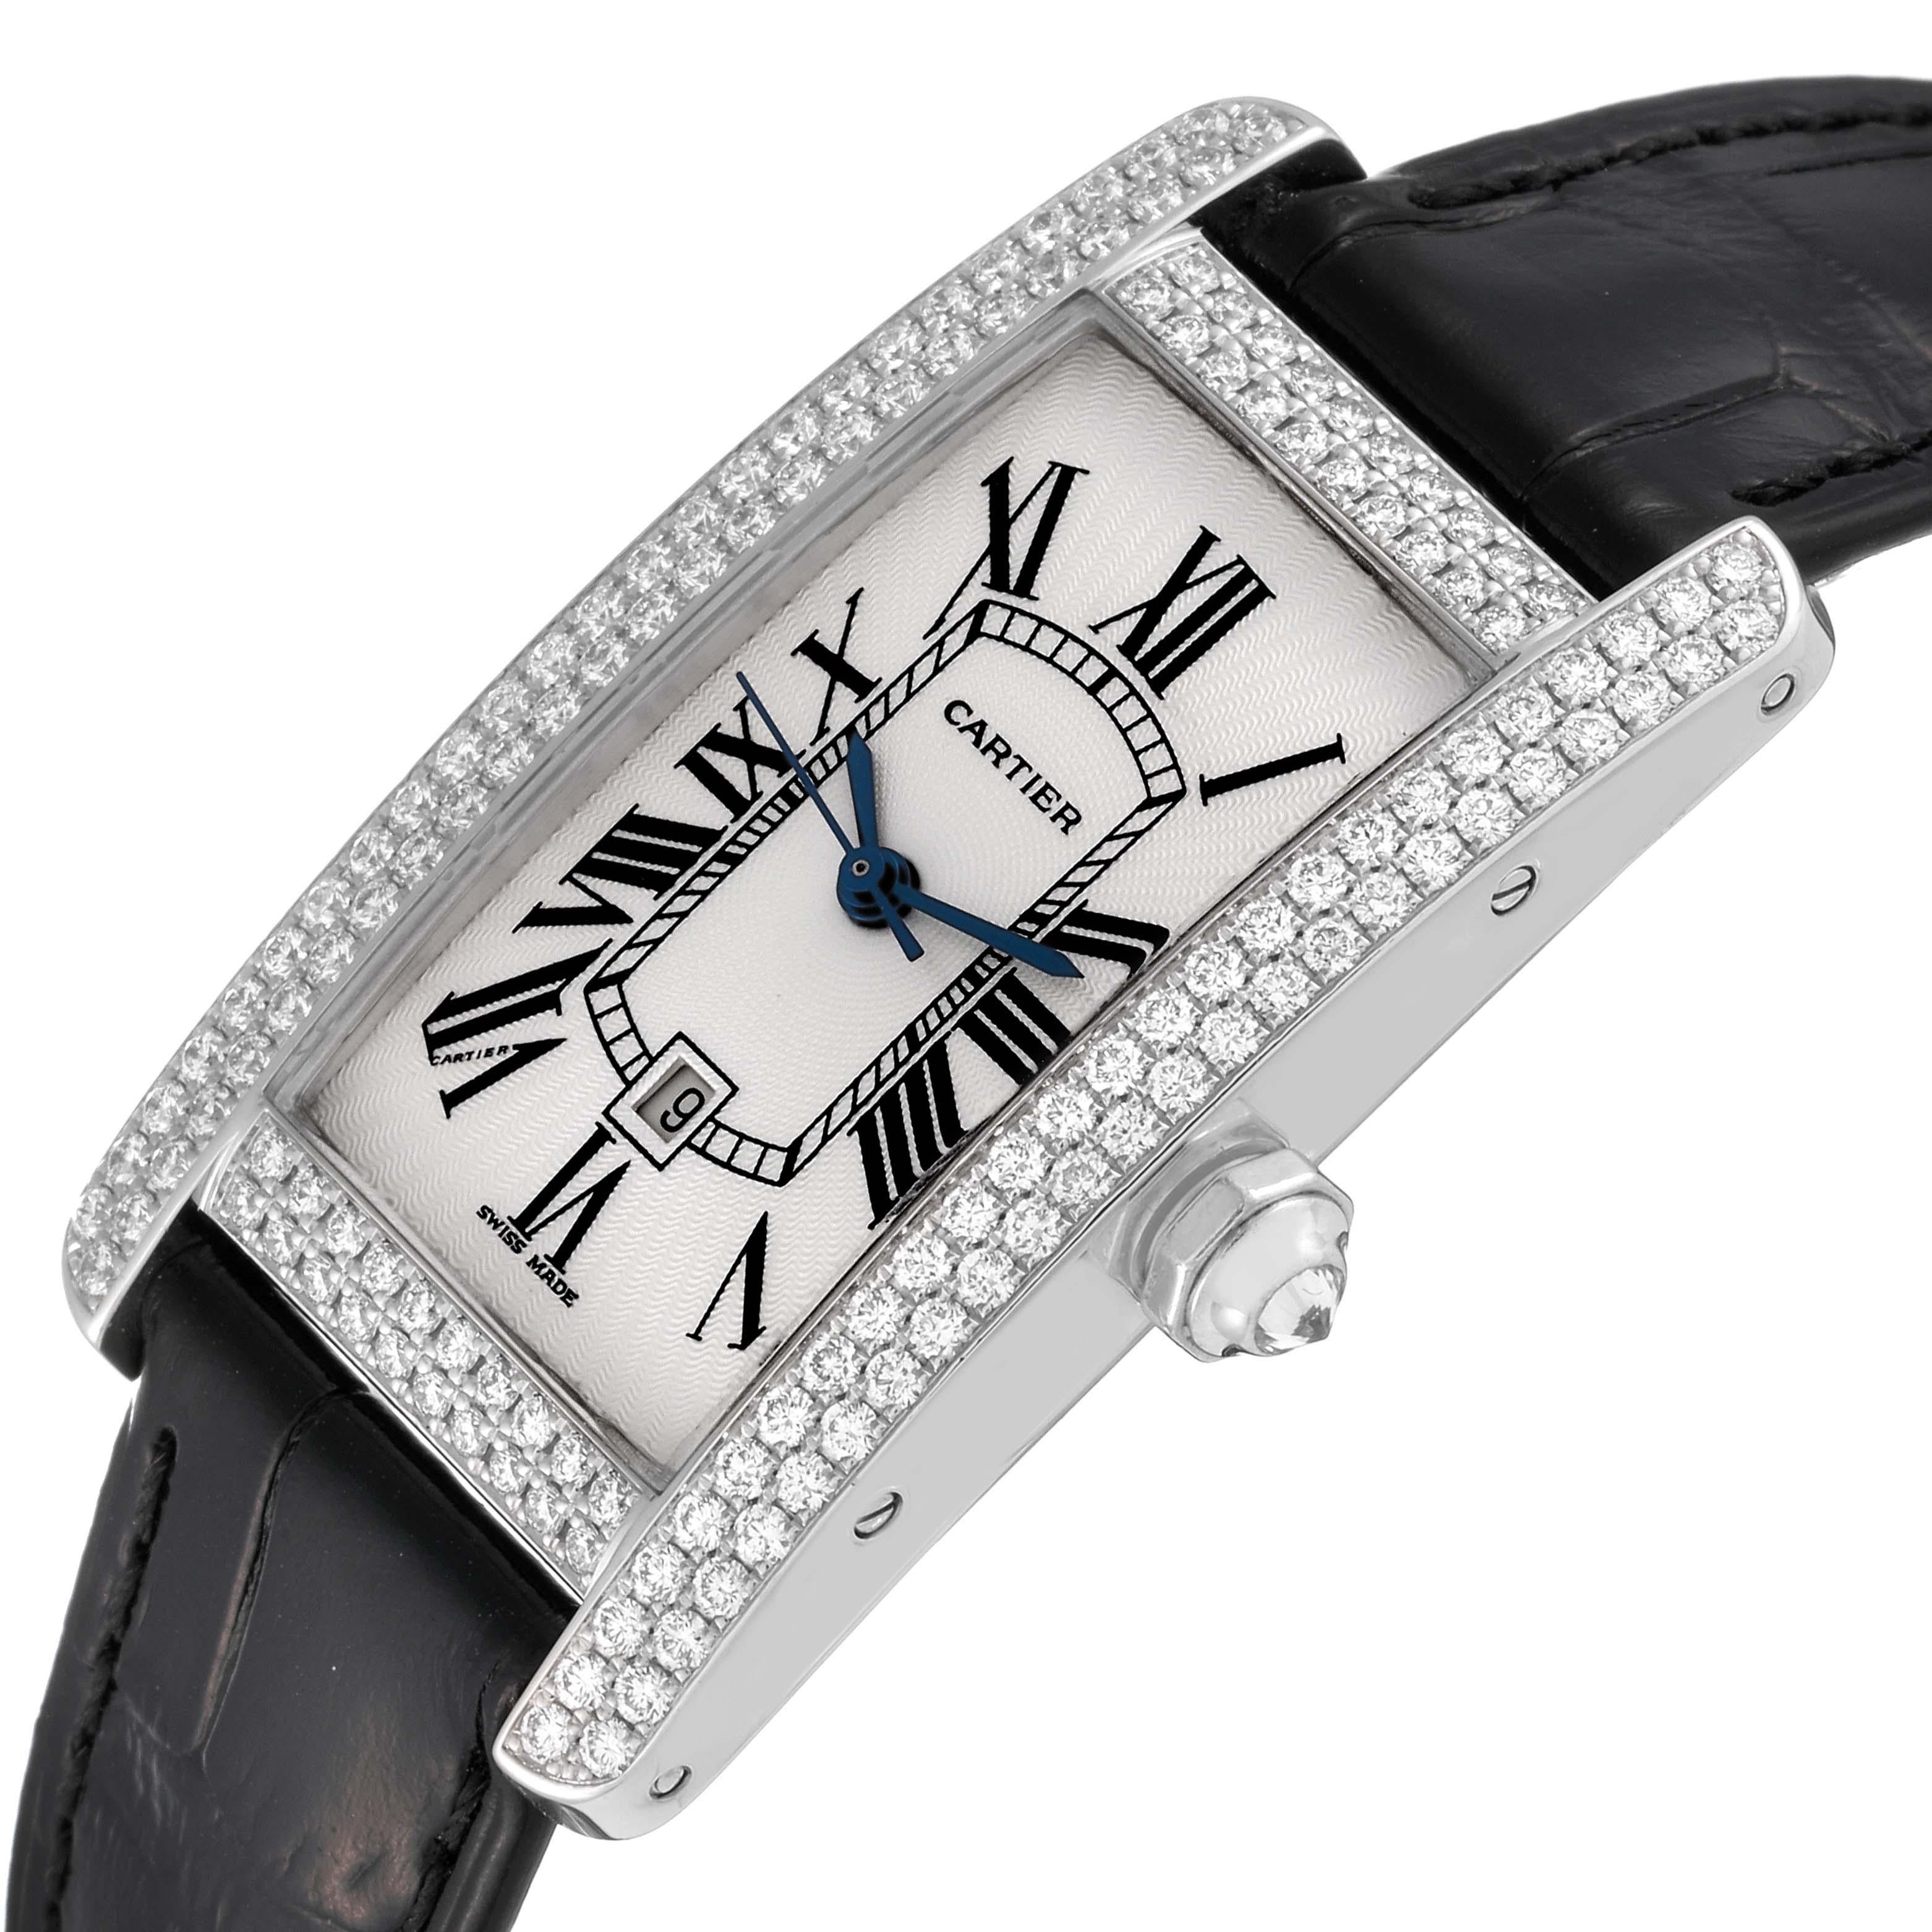 Cartier Tank Americaine White Gold Diamond Ladies Watch 2490 For Sale 1